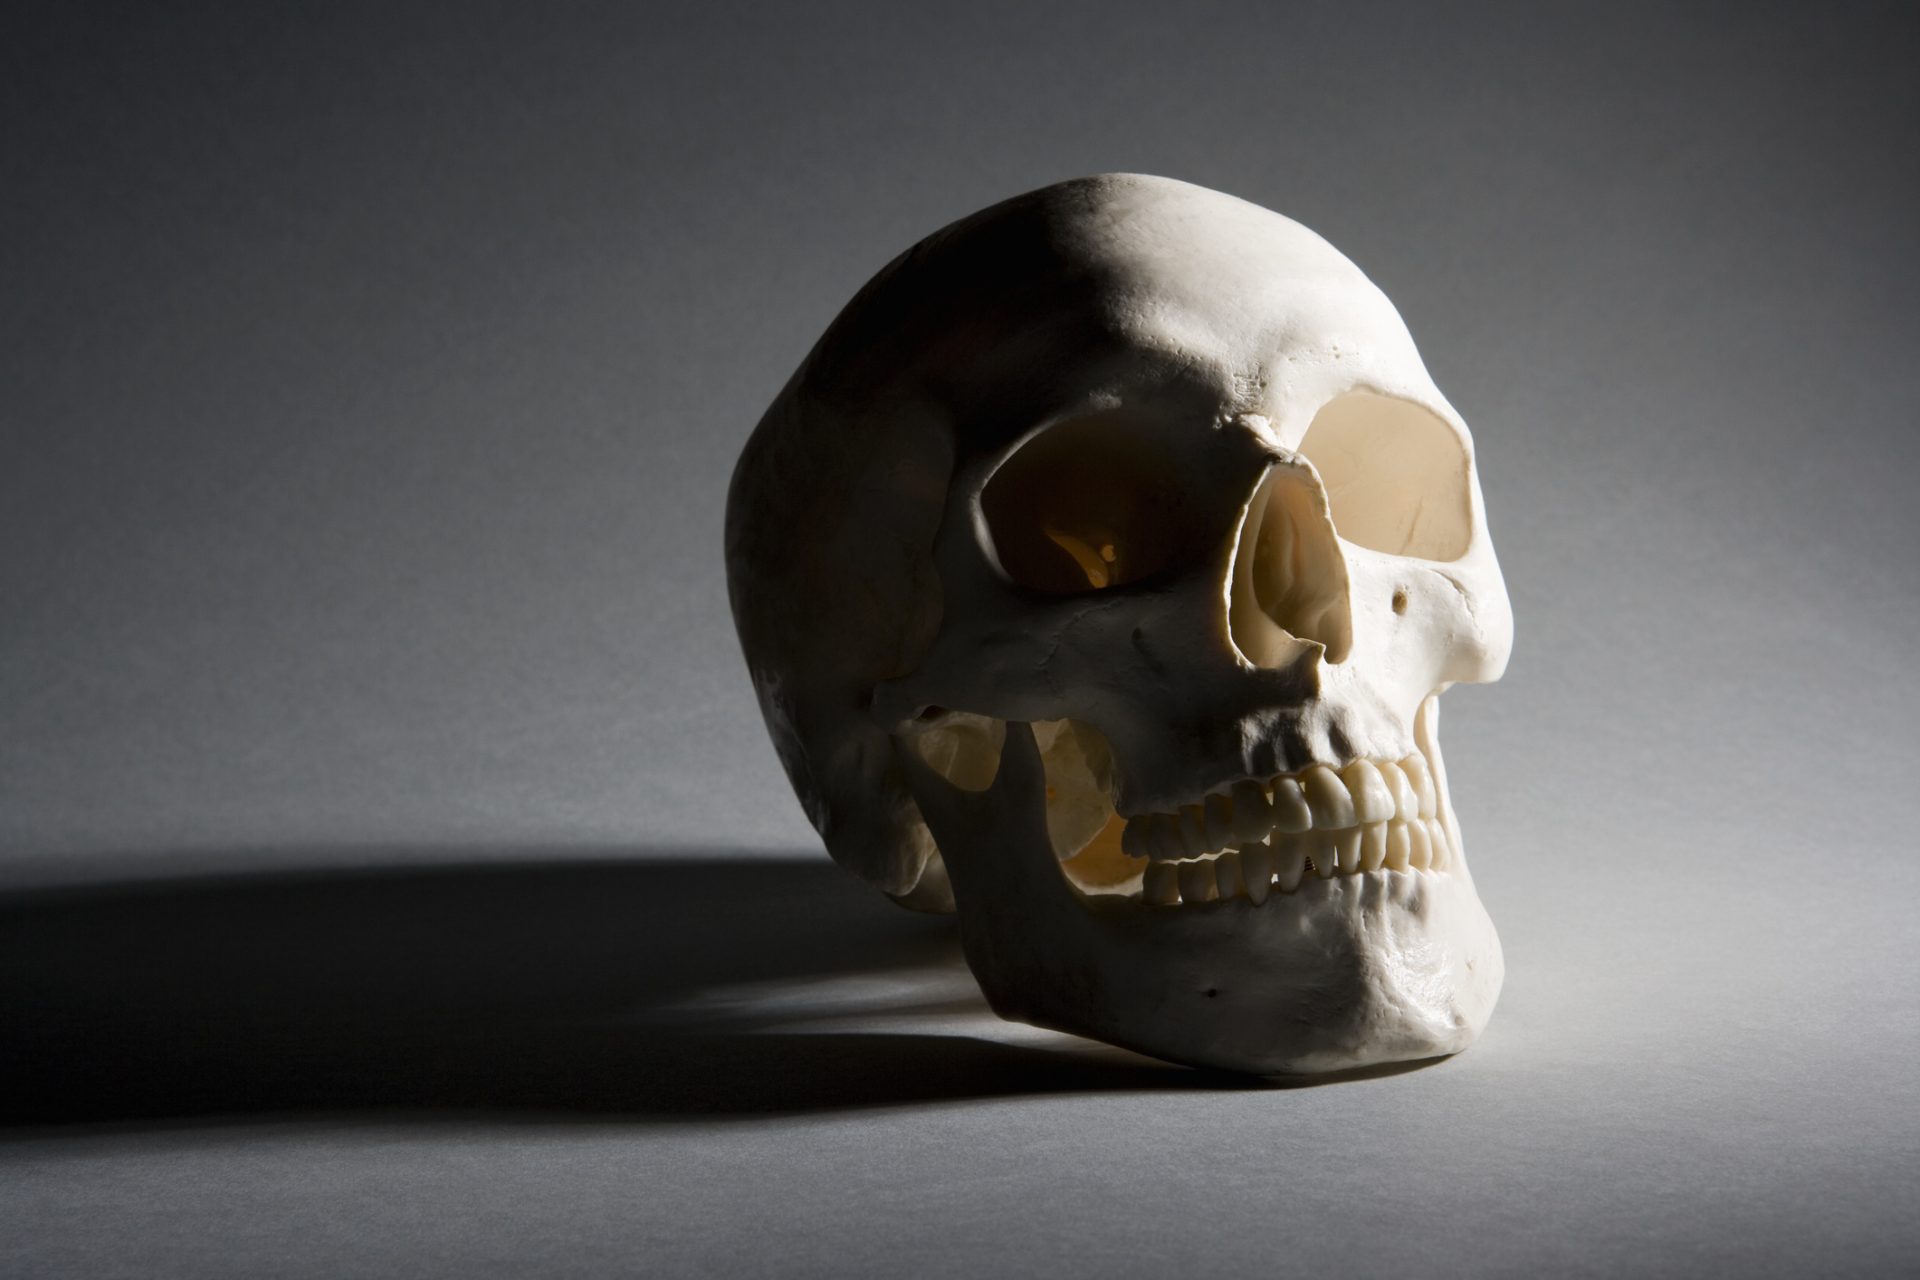 This Japanese ancient civilization intentionally reshaped their skulls